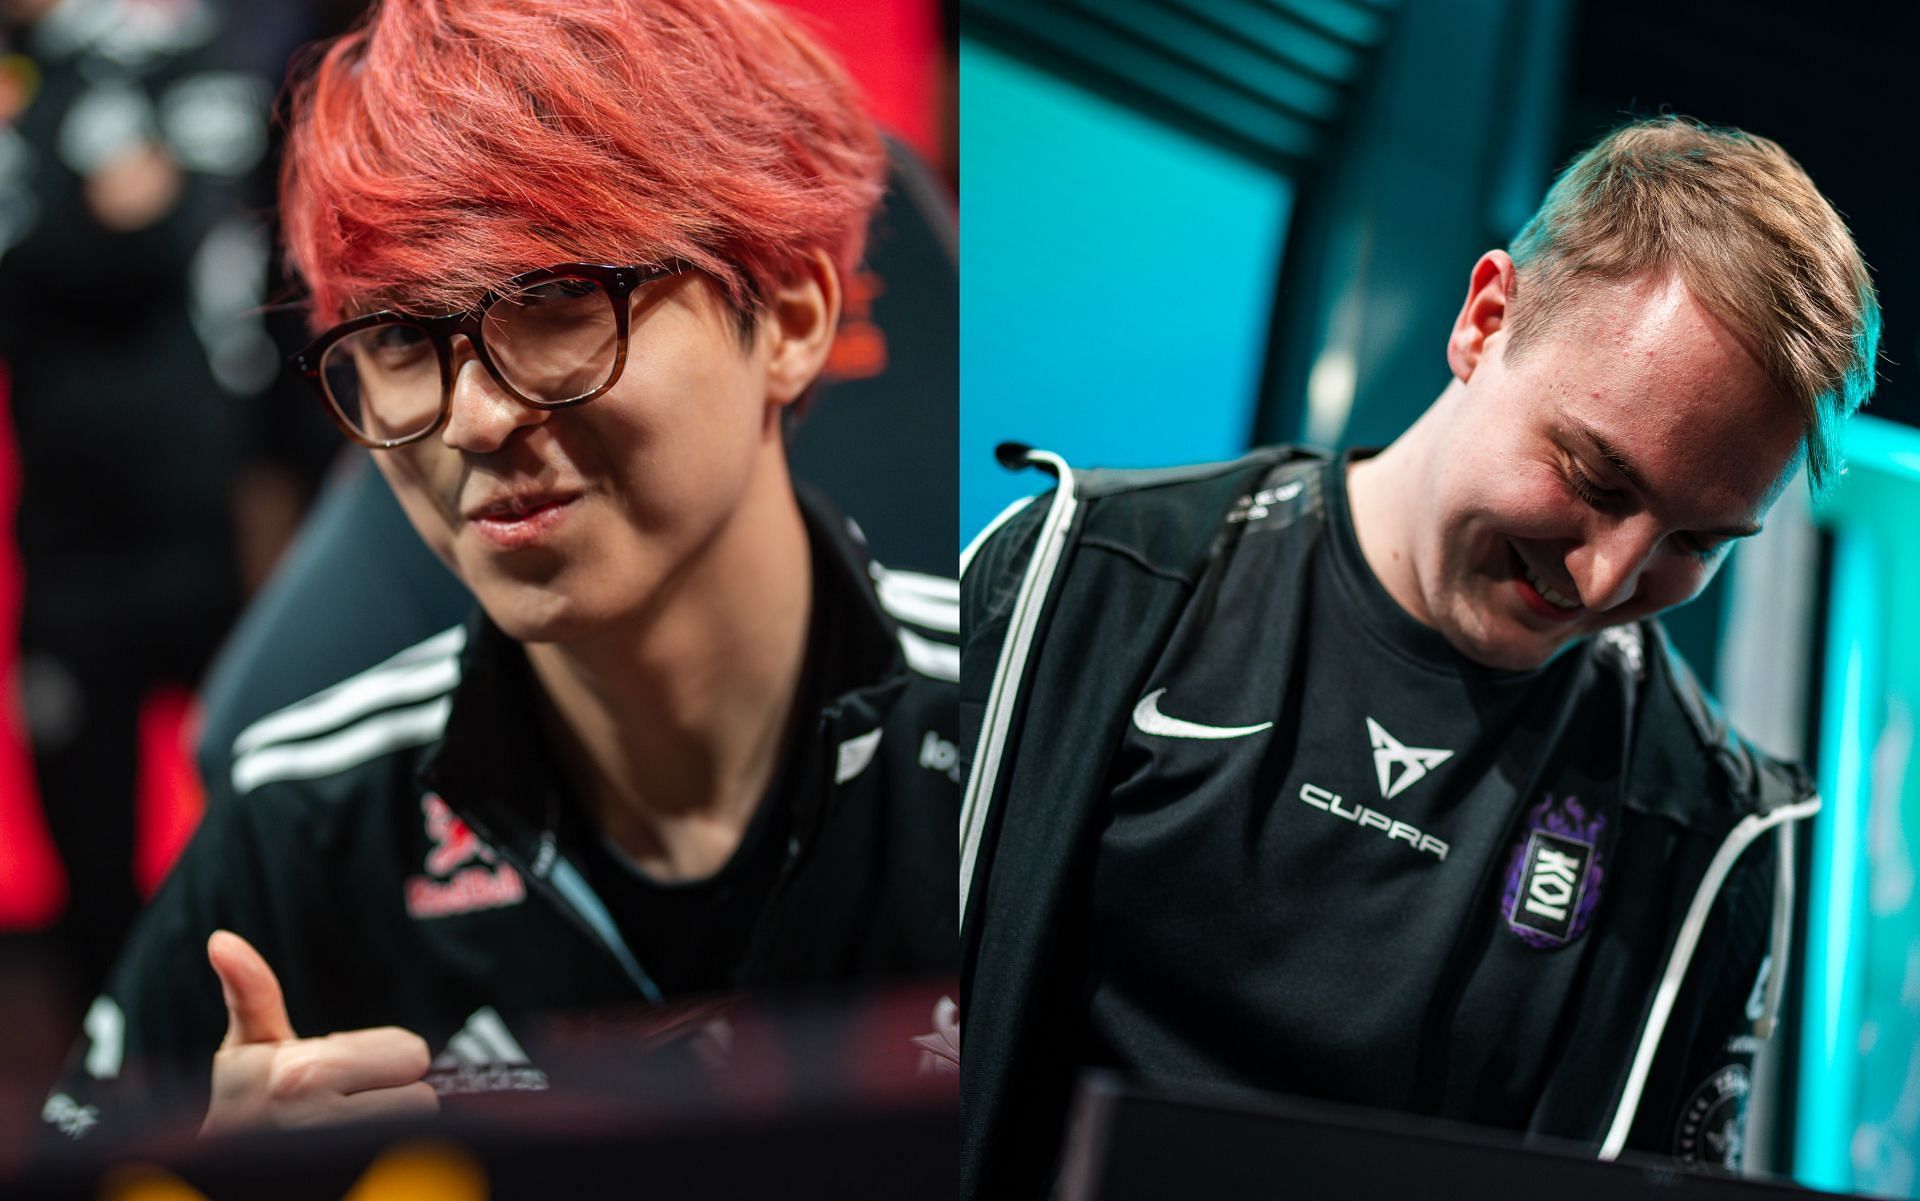 Hans Sama and Trymbi will be key players when G2 Esports and KOI meet at League of Legends LEC 2023 Winter Split (Image via Riot Games)